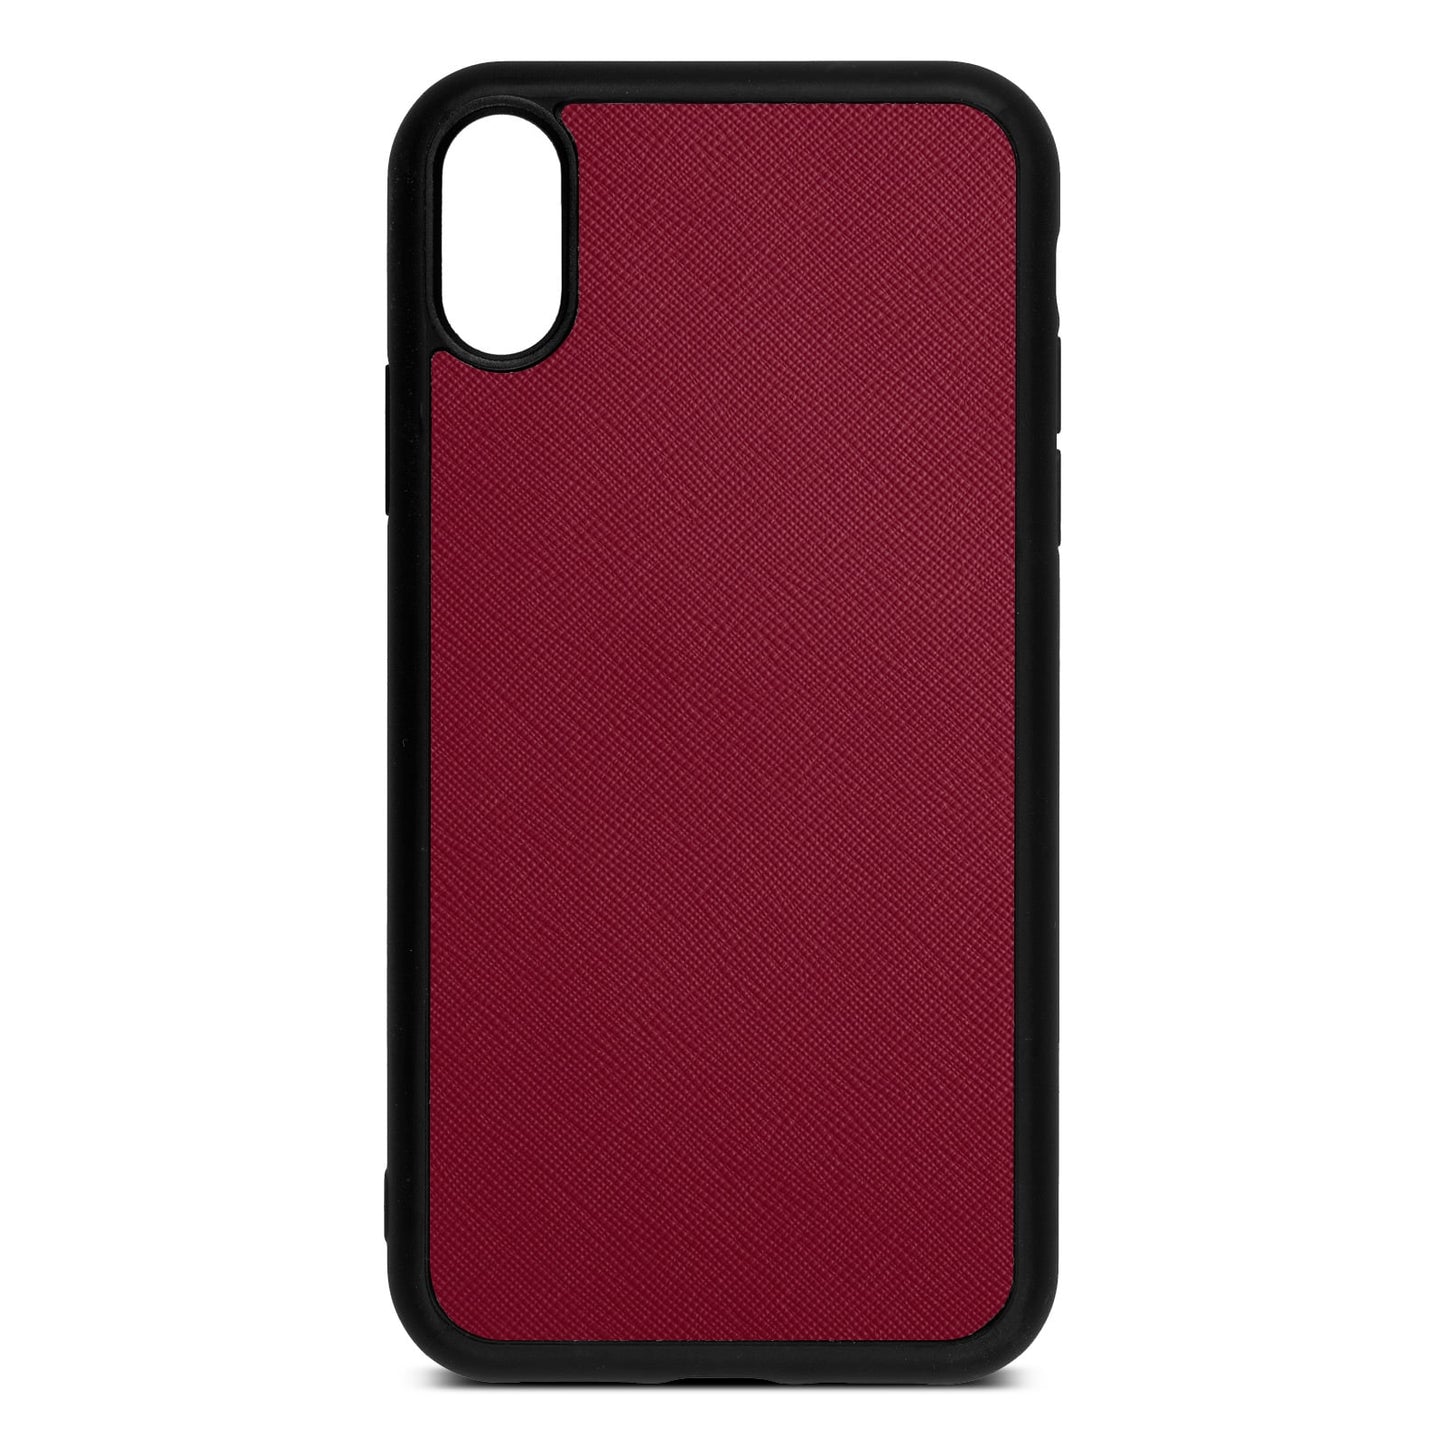 Blank Personalised Dark Red Saffiano Leather iPhone XR Case